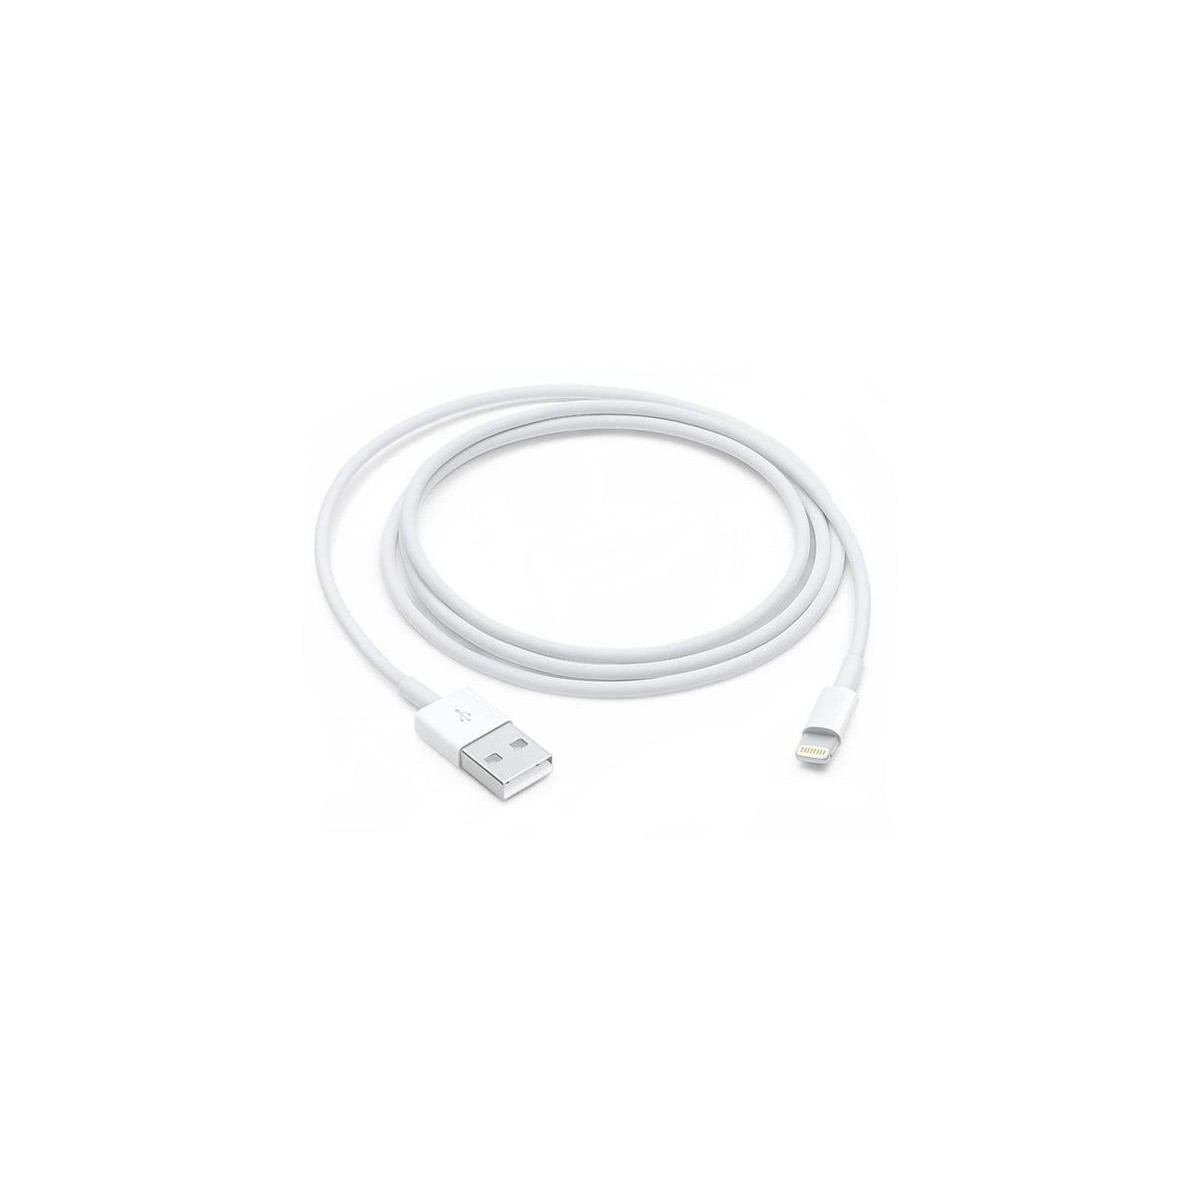 More about Kabel MFIMD819 USB/Lightning iPhone 5, 6, 7, 8, X, 11 2m White